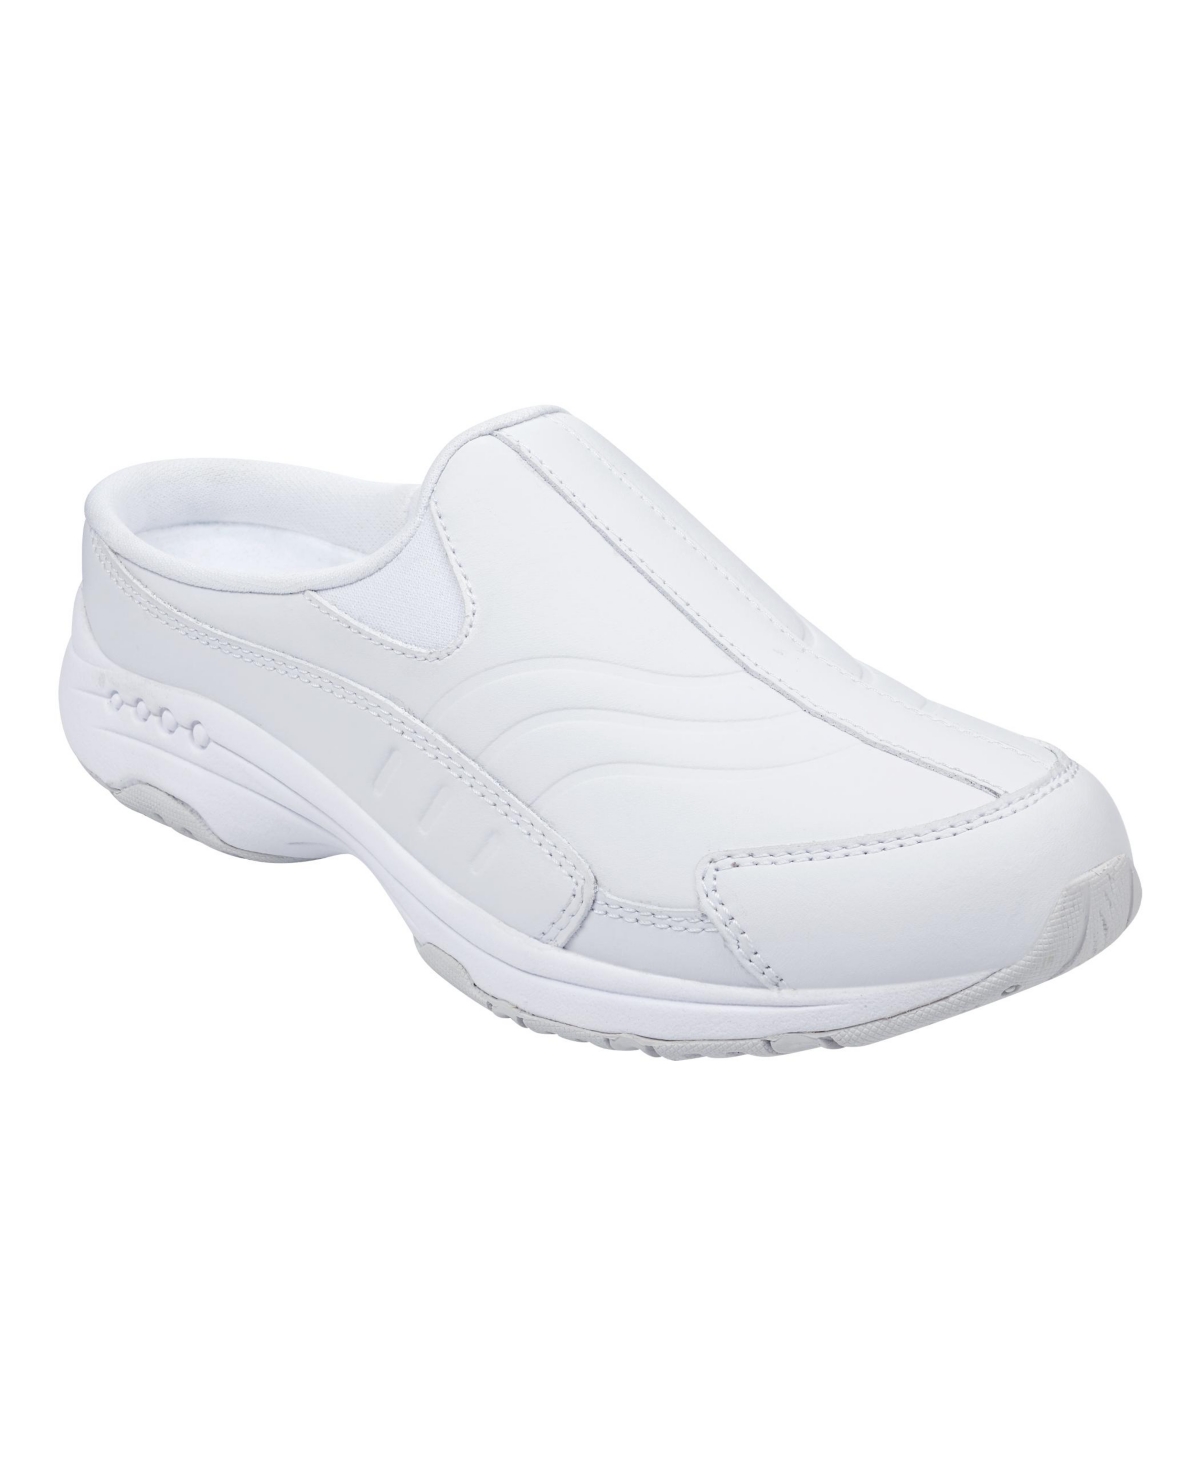 Women's Tourguide Casual Flat Slip-on Mules - White